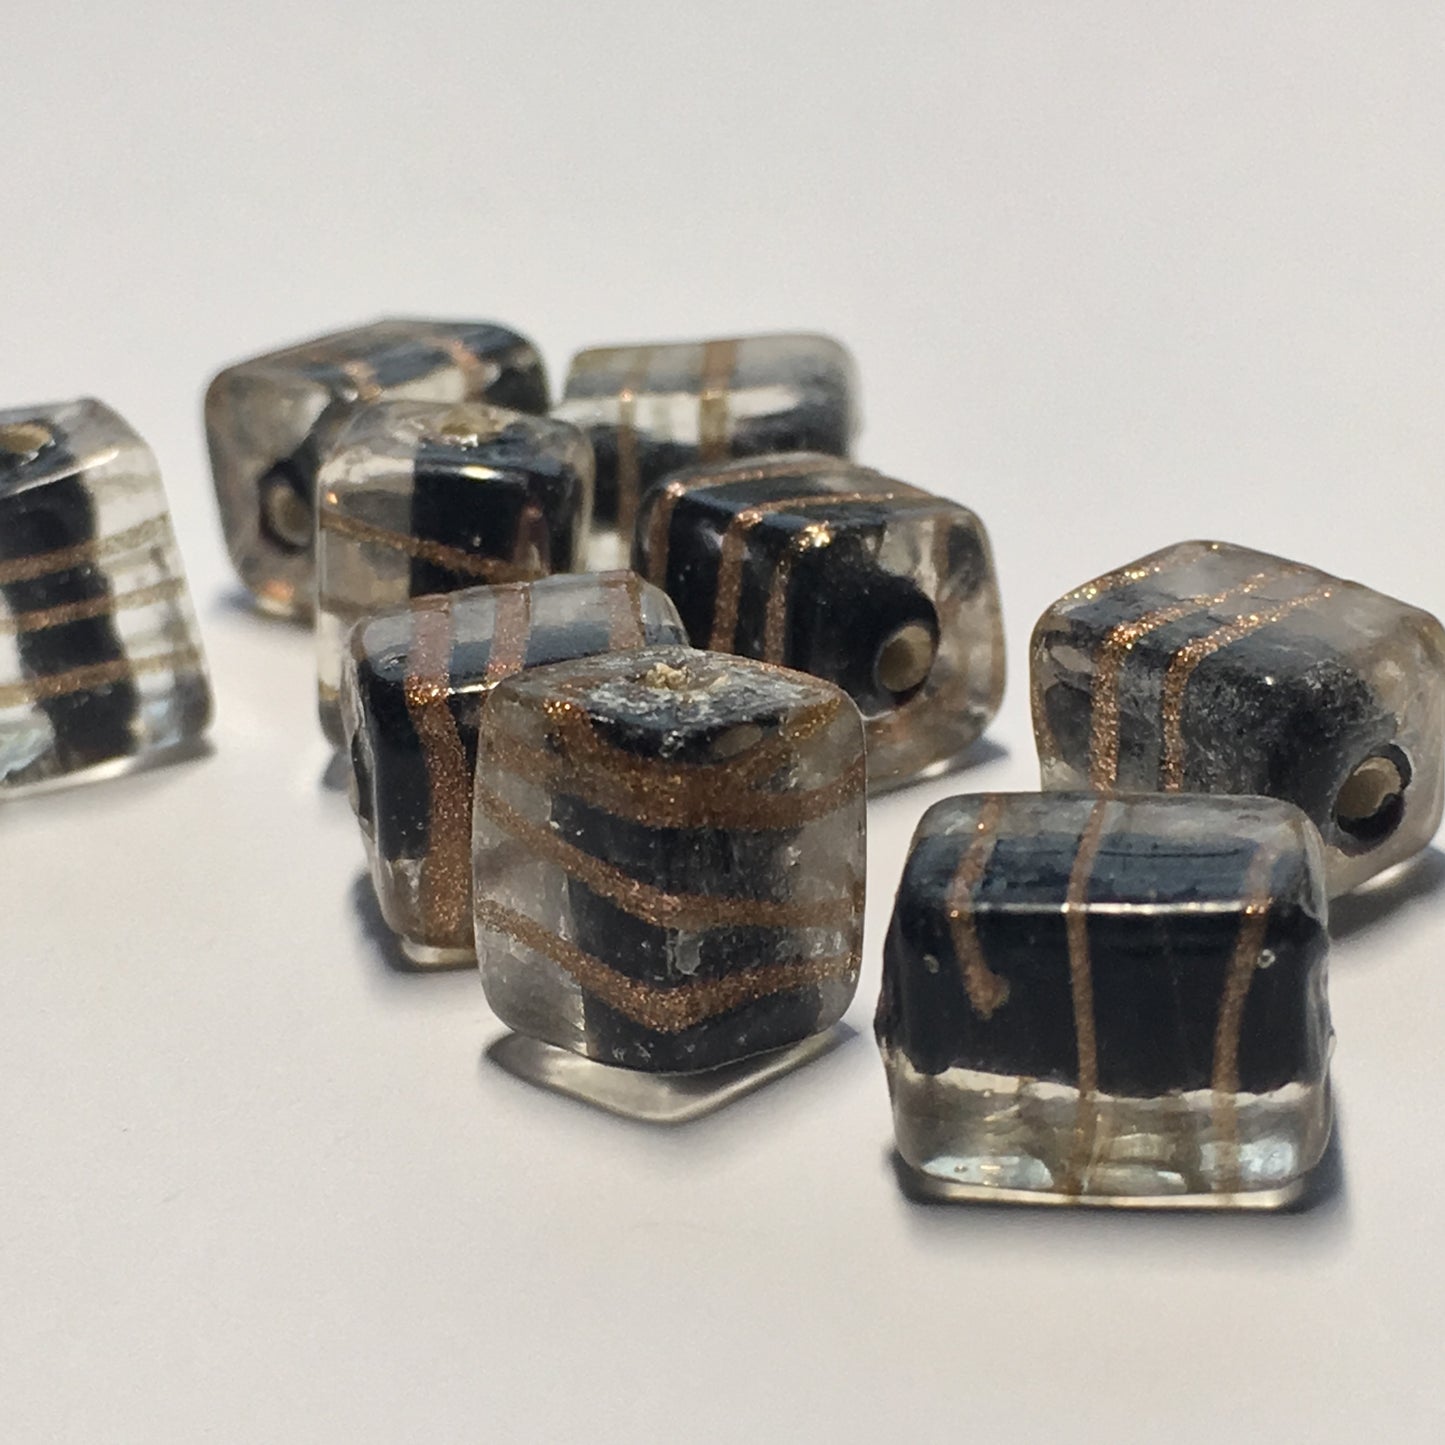 Clear Black Lined Glass Lampwork Rectangle Beads with Copper Foil Swirls, 11 x 8 mm, 9 Beads